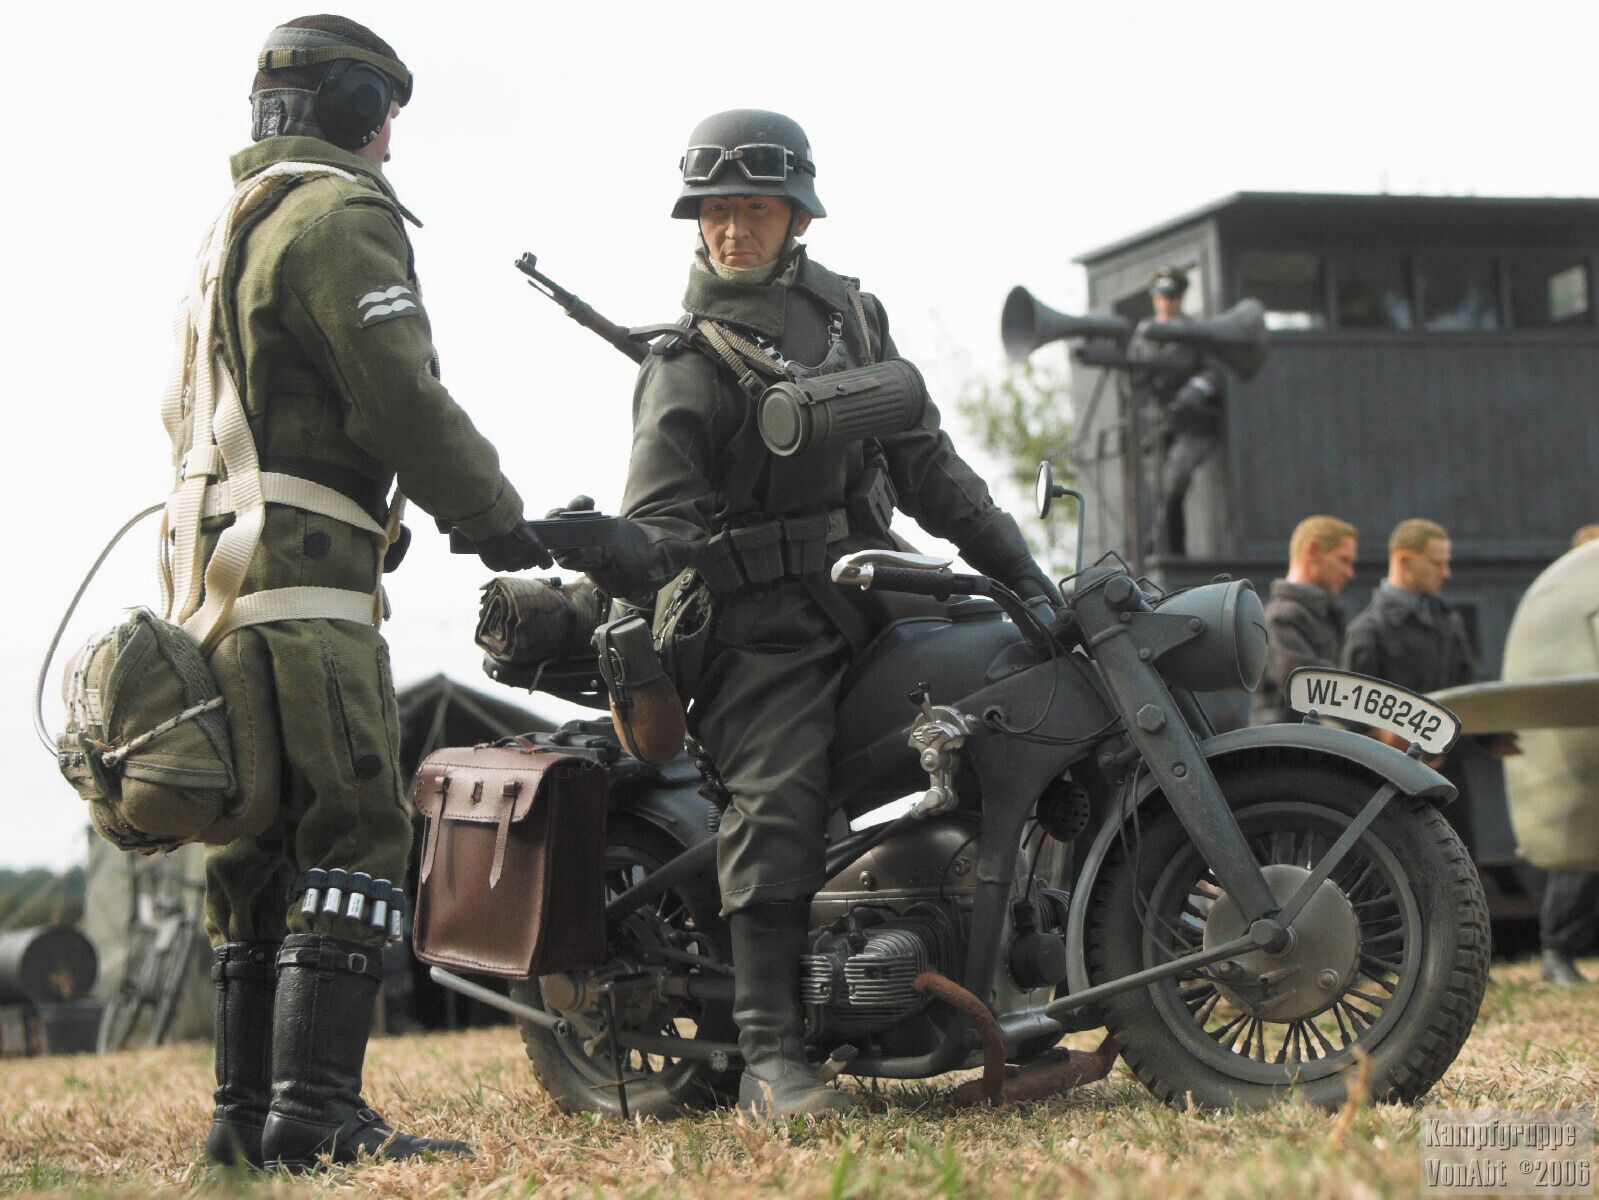 Vehicles, such as this motorcycle, play a major part in these epic scenes.